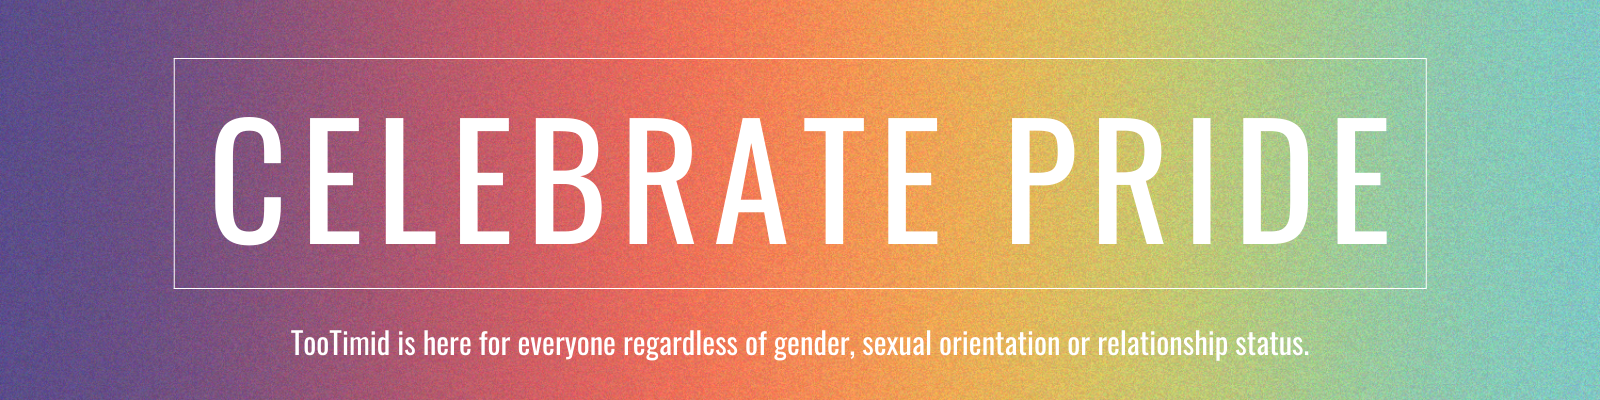 Image of our collection banner for our celebrate pride collection. Banner reads: Celebrate price. TooTimid is here for everyone regardless of gender, sexual orientation, or relationship status.